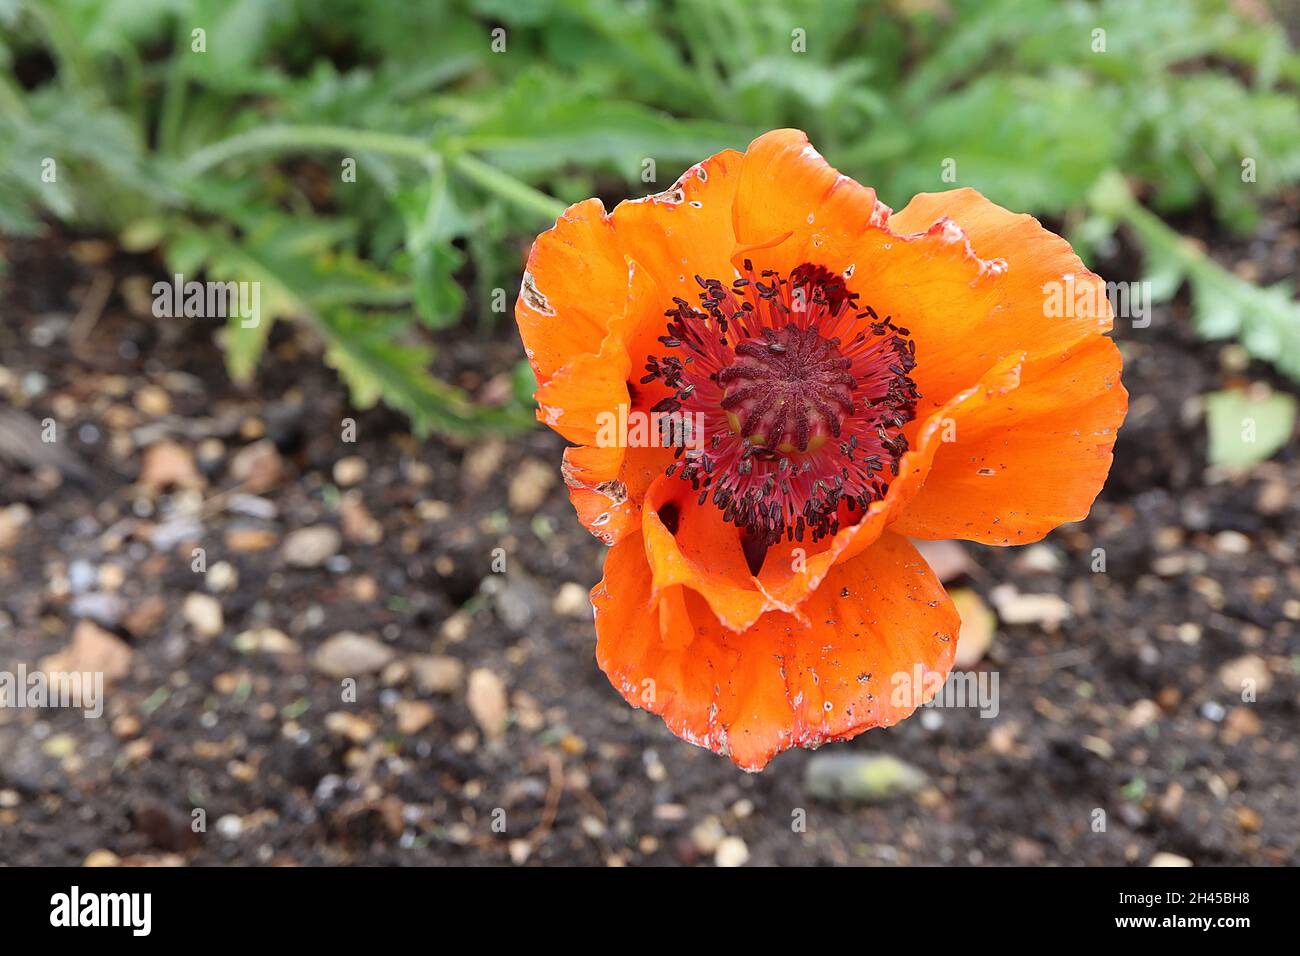 Papaver dubium long-headed poppy – large orange flowers with black markings, deeply lobed leaves and long stems,  October, England, UK Stock Photo